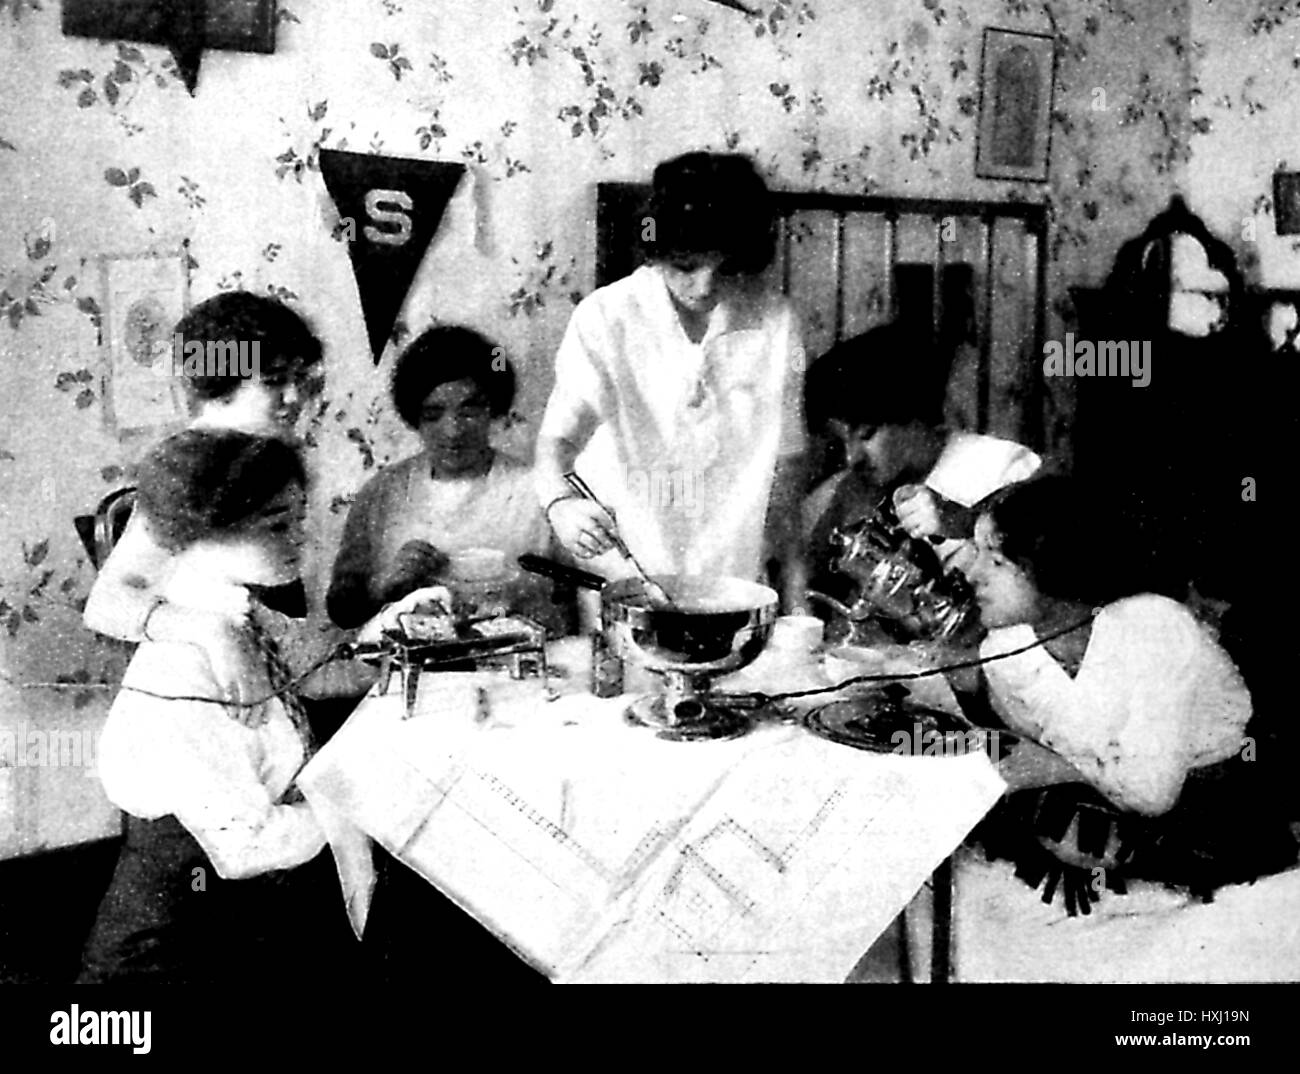 Illustration showing a group of excited housewives sitting around a suburban kitchen table and using a variety of electrical appliances, including a waffle iron, fondue pot, chafing dish and kettle, 1912. Stock Photo